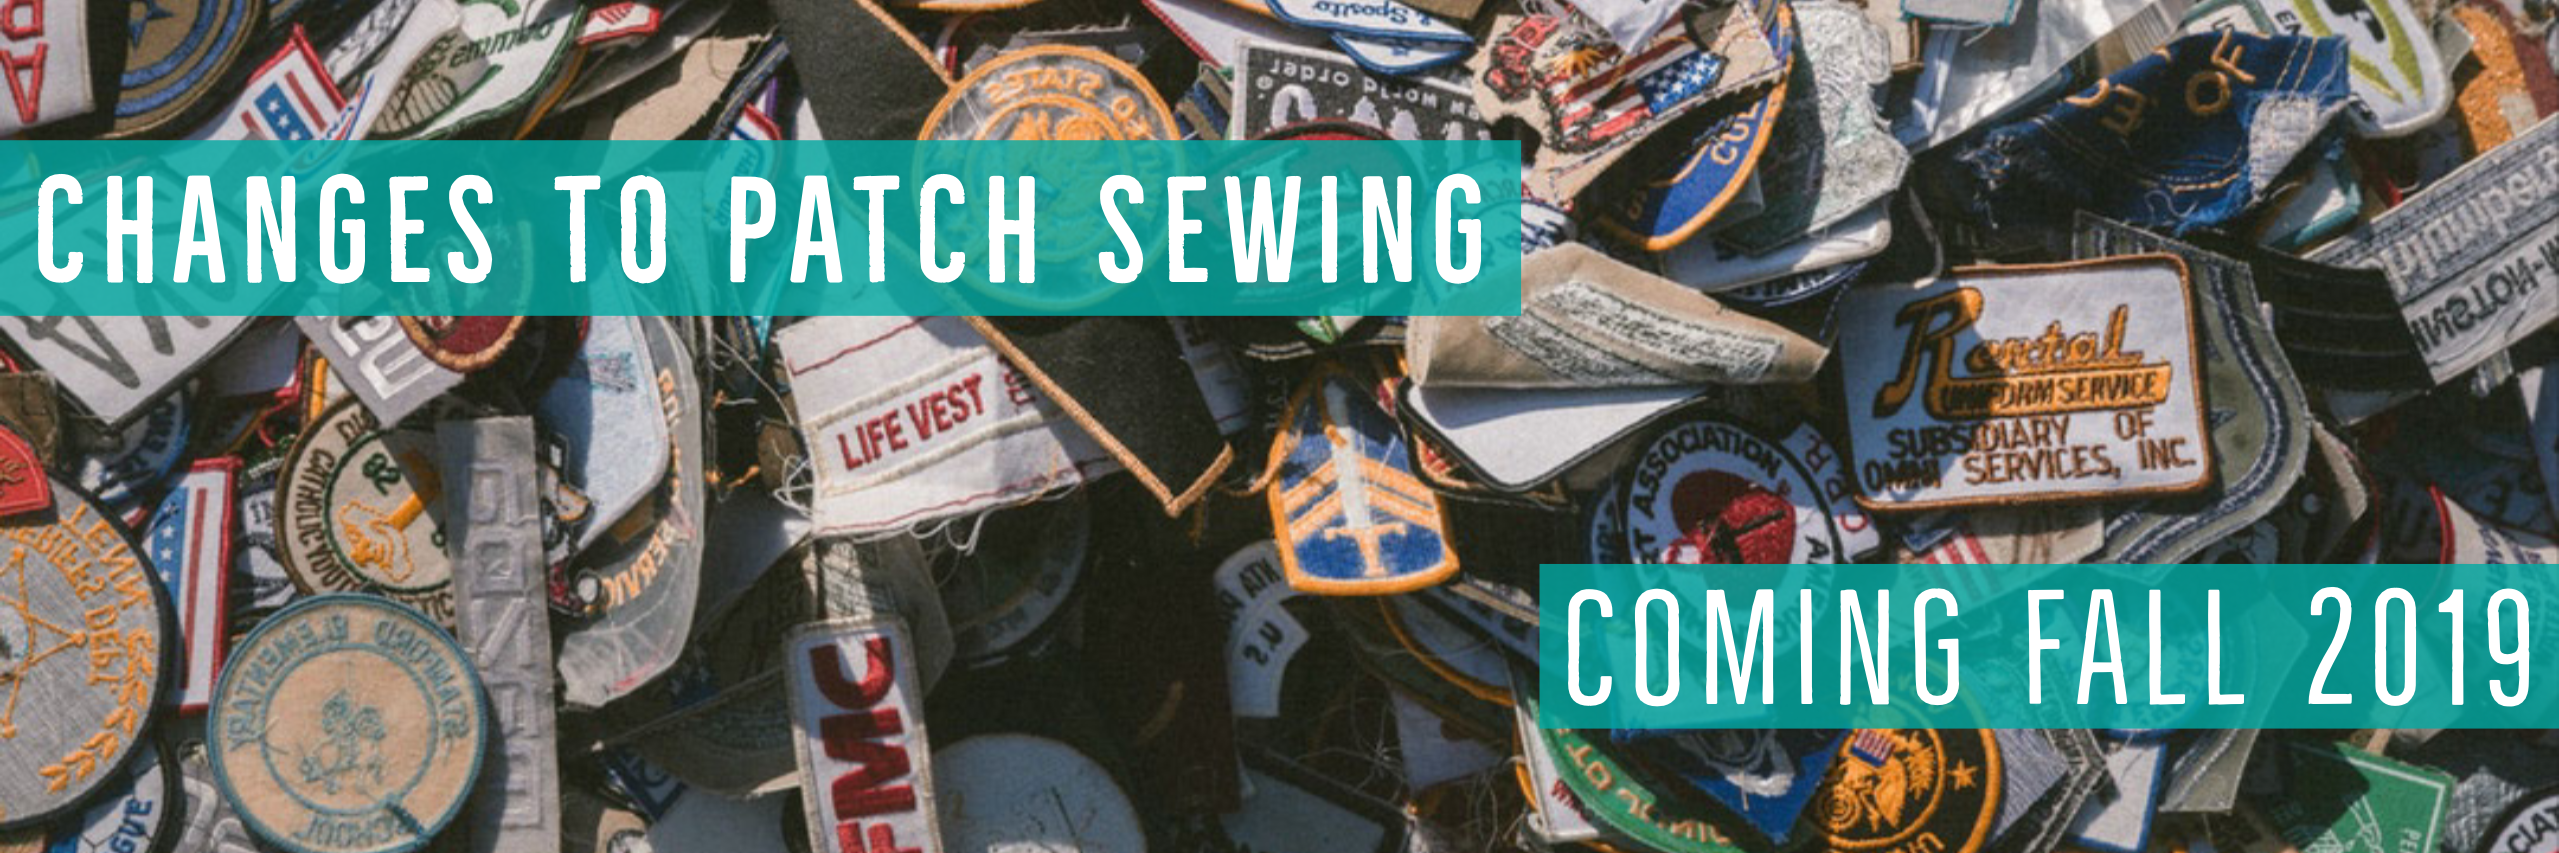 Changes to patch sewing services - Fall 2019 - Stacey Sansom Designs